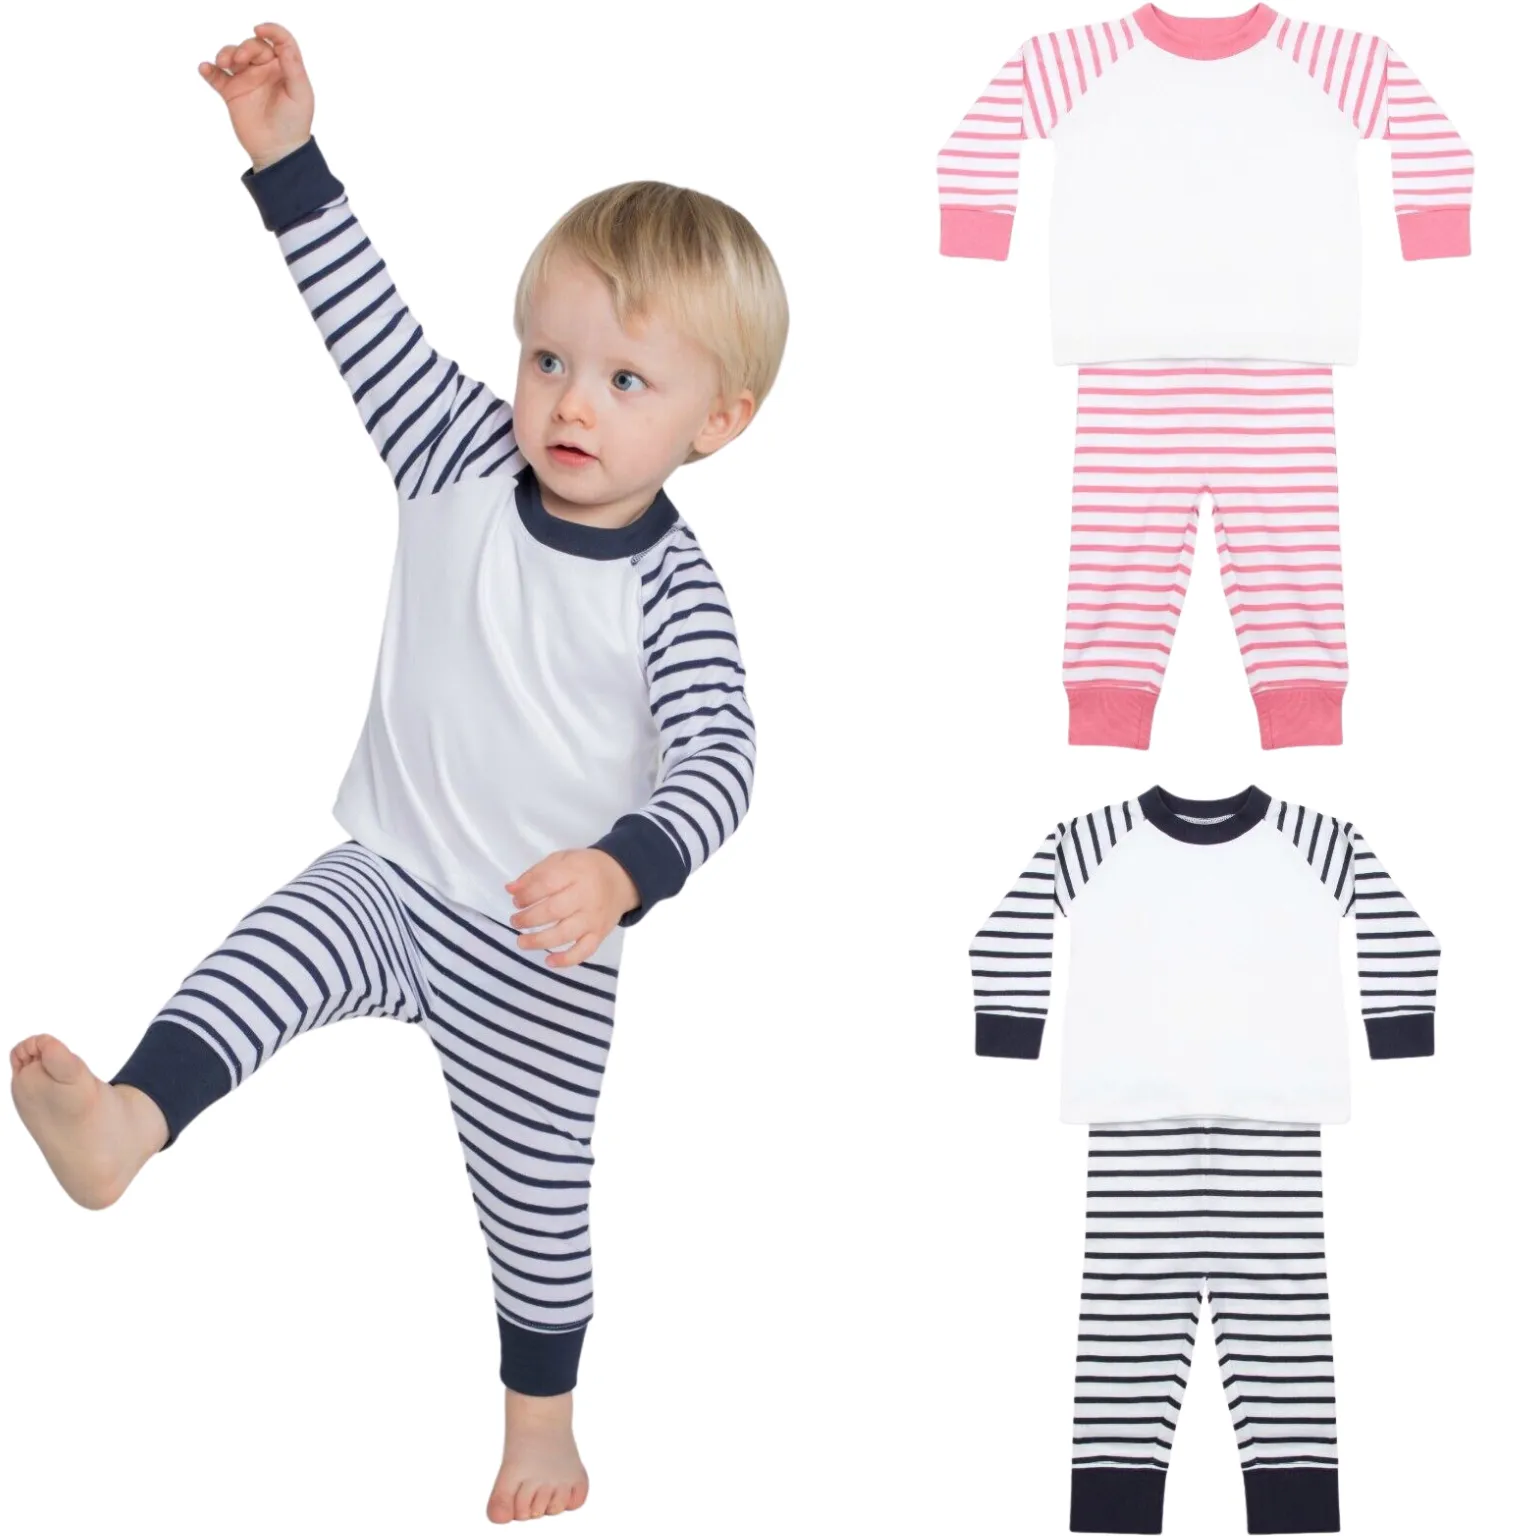 Toddler Pajamas manufacturing with recycled materials